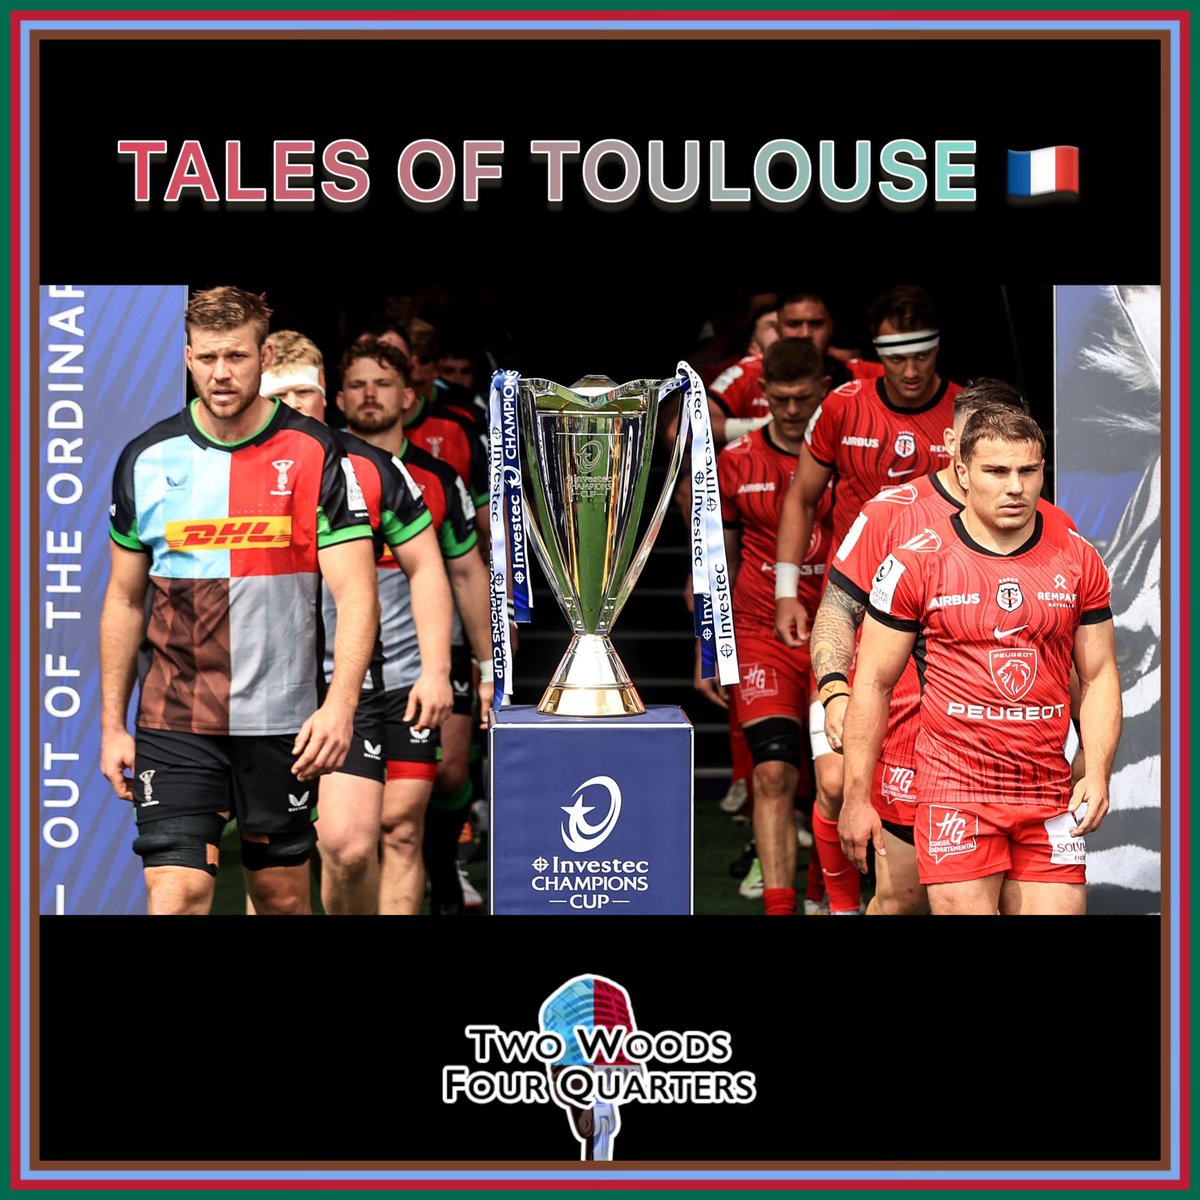 Ep23: Tales of Toulouse 🇫🇷 The bat was swung. Join us for a debrief of one of the great rugby weekends. Talking points 👇 ✈️ Tales of Toulouse 🏆 European Euphoria 🔴 Toulouse (A) Review ⚫️ Exeter (A) Preview 🎧 Listen: linktr.ee/harlequinspod #COYQ